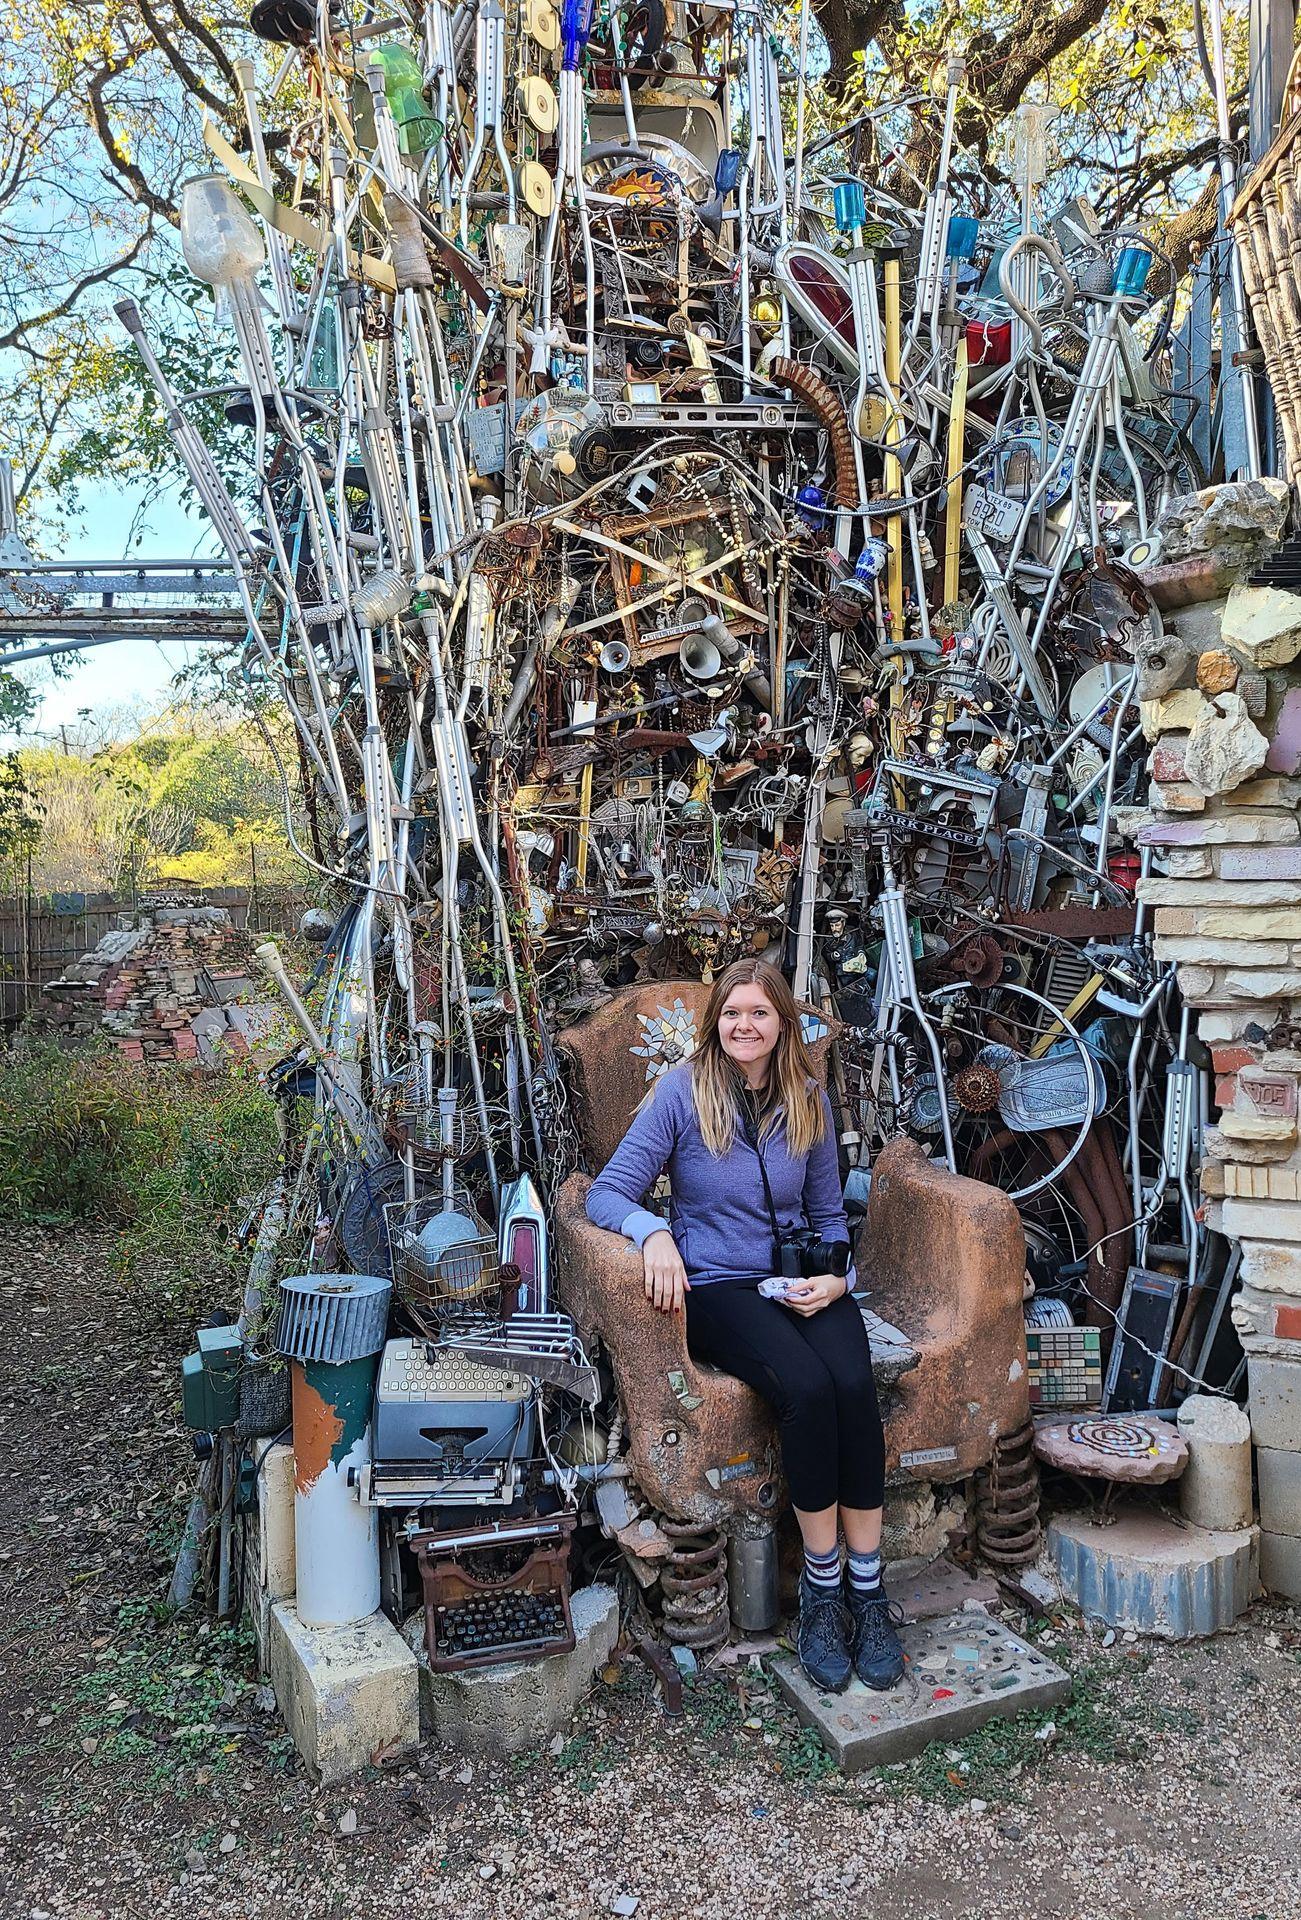 Lydia sitting on a thorne chair with objects built up behind her at the Cathedral of Junk.